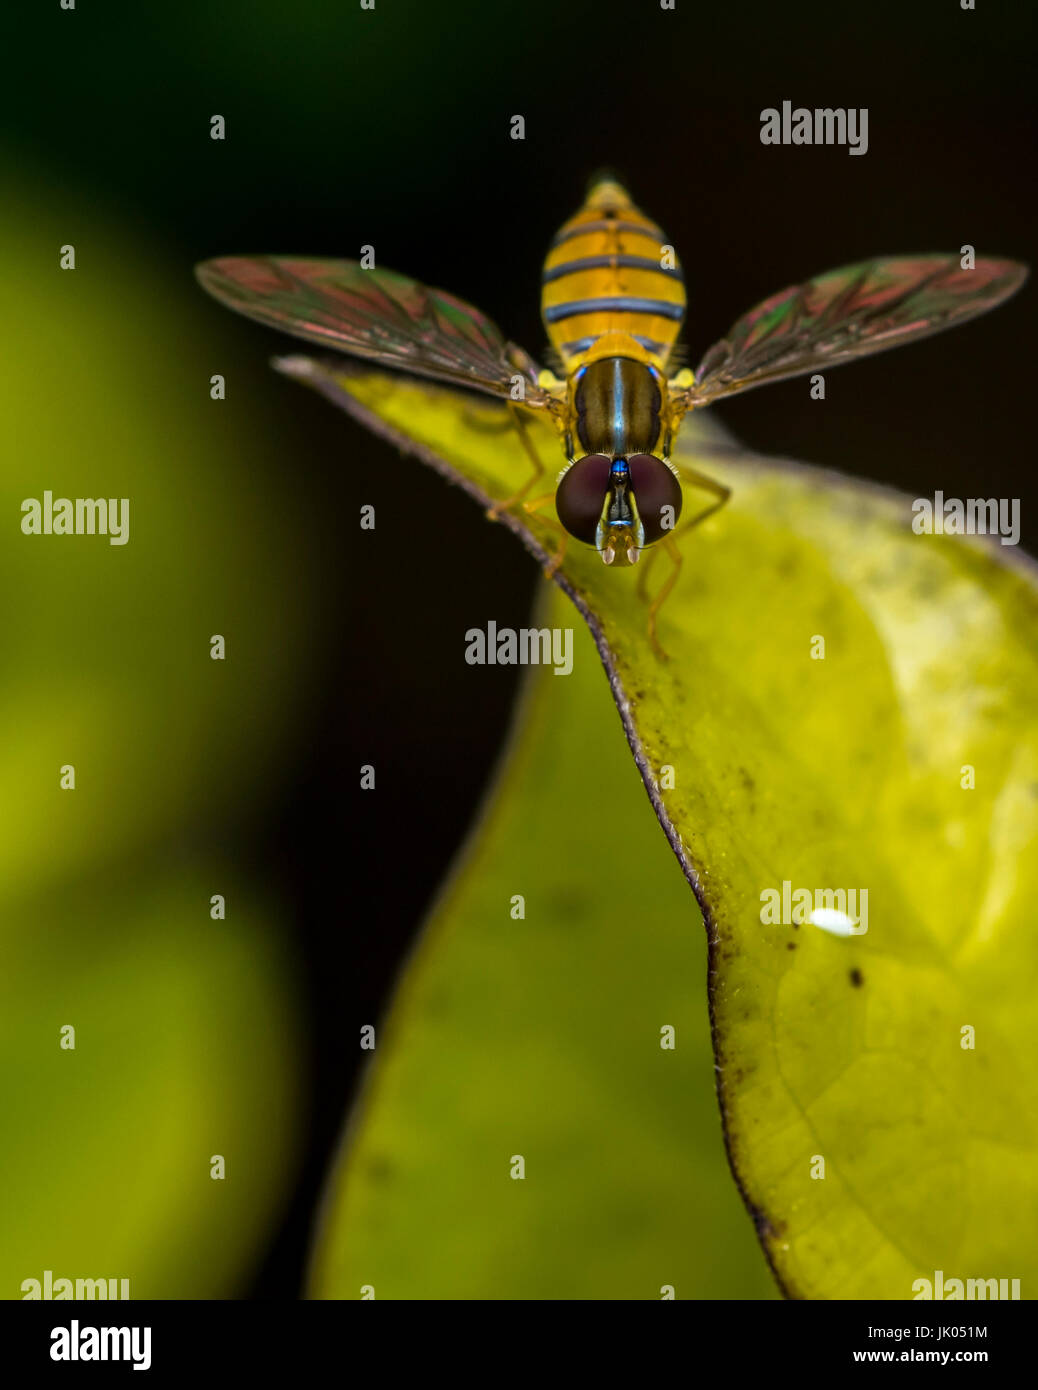 Toxomerus marginatus or flower fly on a green leaf Stock Photo